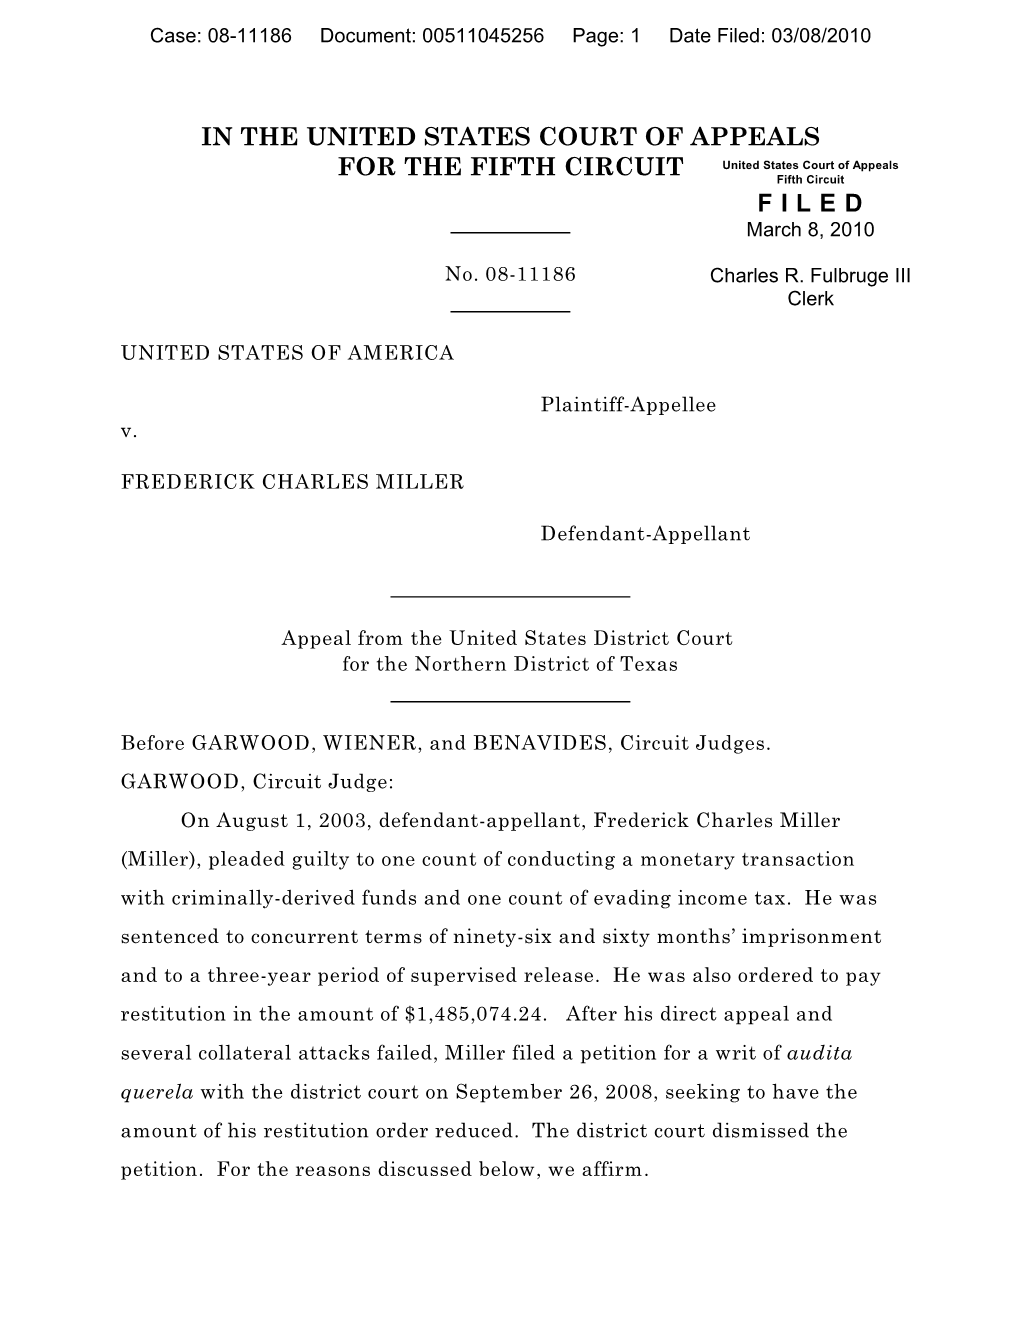 In the United States Court of Appeals for the Fifth